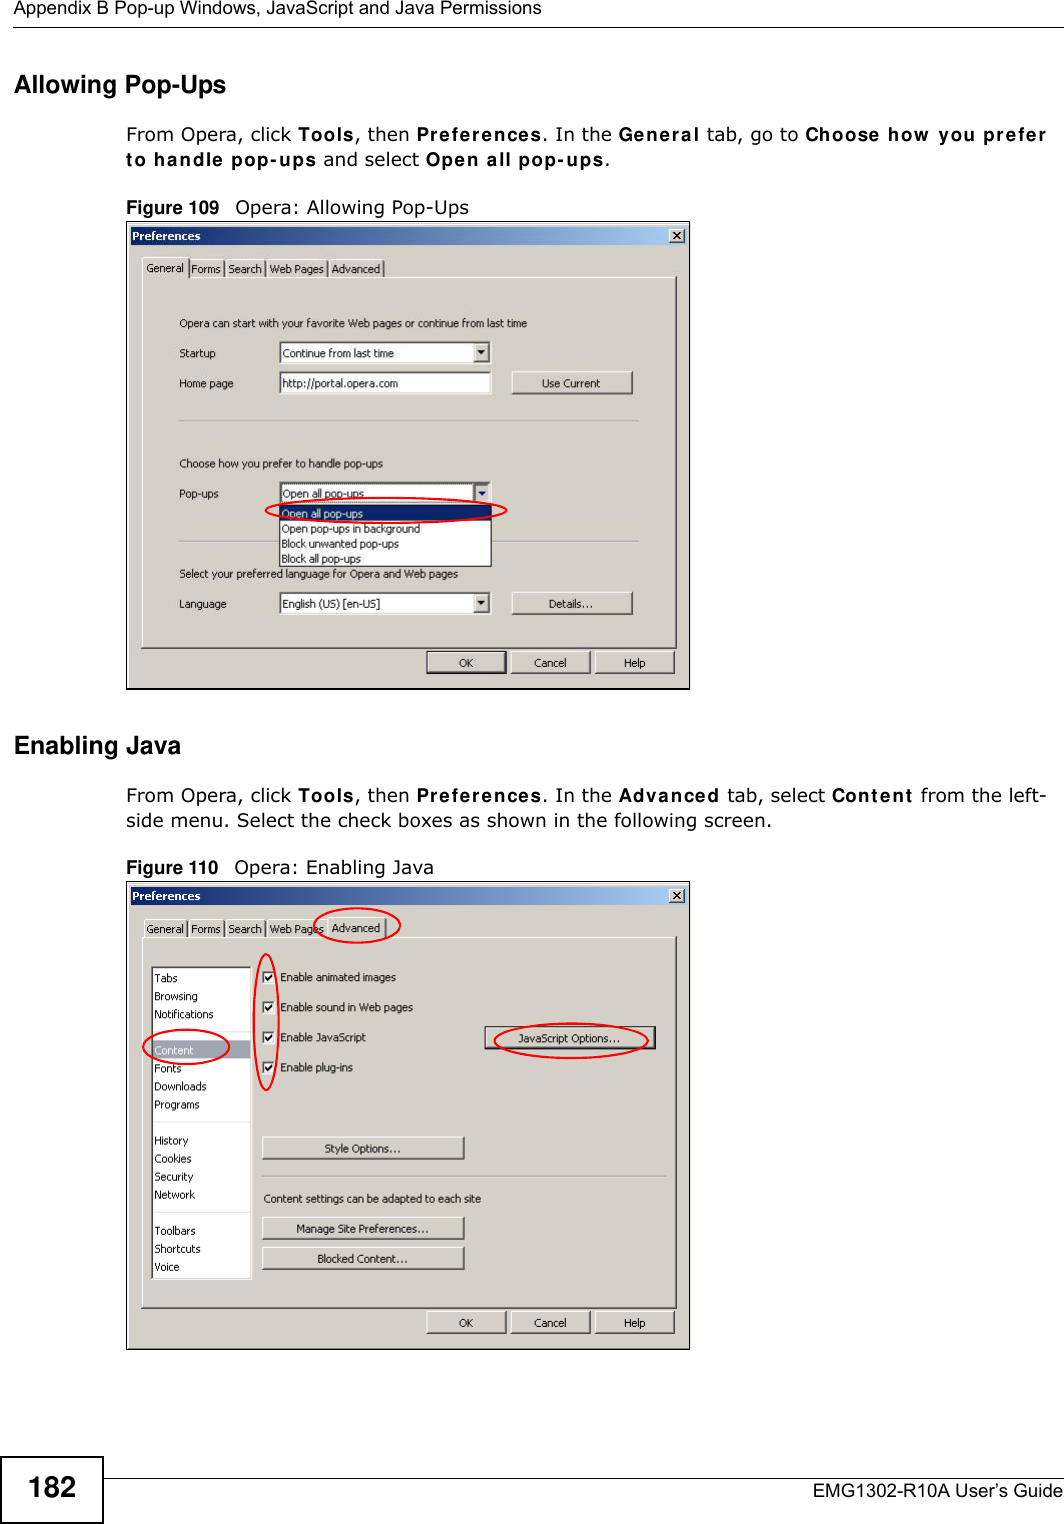 Appendix B Pop-up Windows, JavaScript and Java PermissionsEMG1302-R10A User’s Guide182Allowing Pop-UpsFrom Opera, click Tools, then Preferences. In the Ge n e ra l tab, go to Choose how  you prefer t o handle pop- ups and select Open a ll pop- ups.Figure 109   Opera: Allowing Pop-UpsEnabling JavaFrom Opera, click Tools, then Preferences. In the Adva n ced tab, select Con t e nt  from the left-side menu. Select the check boxes as shown in the following screen.Figure 110   Opera: Enabling Java